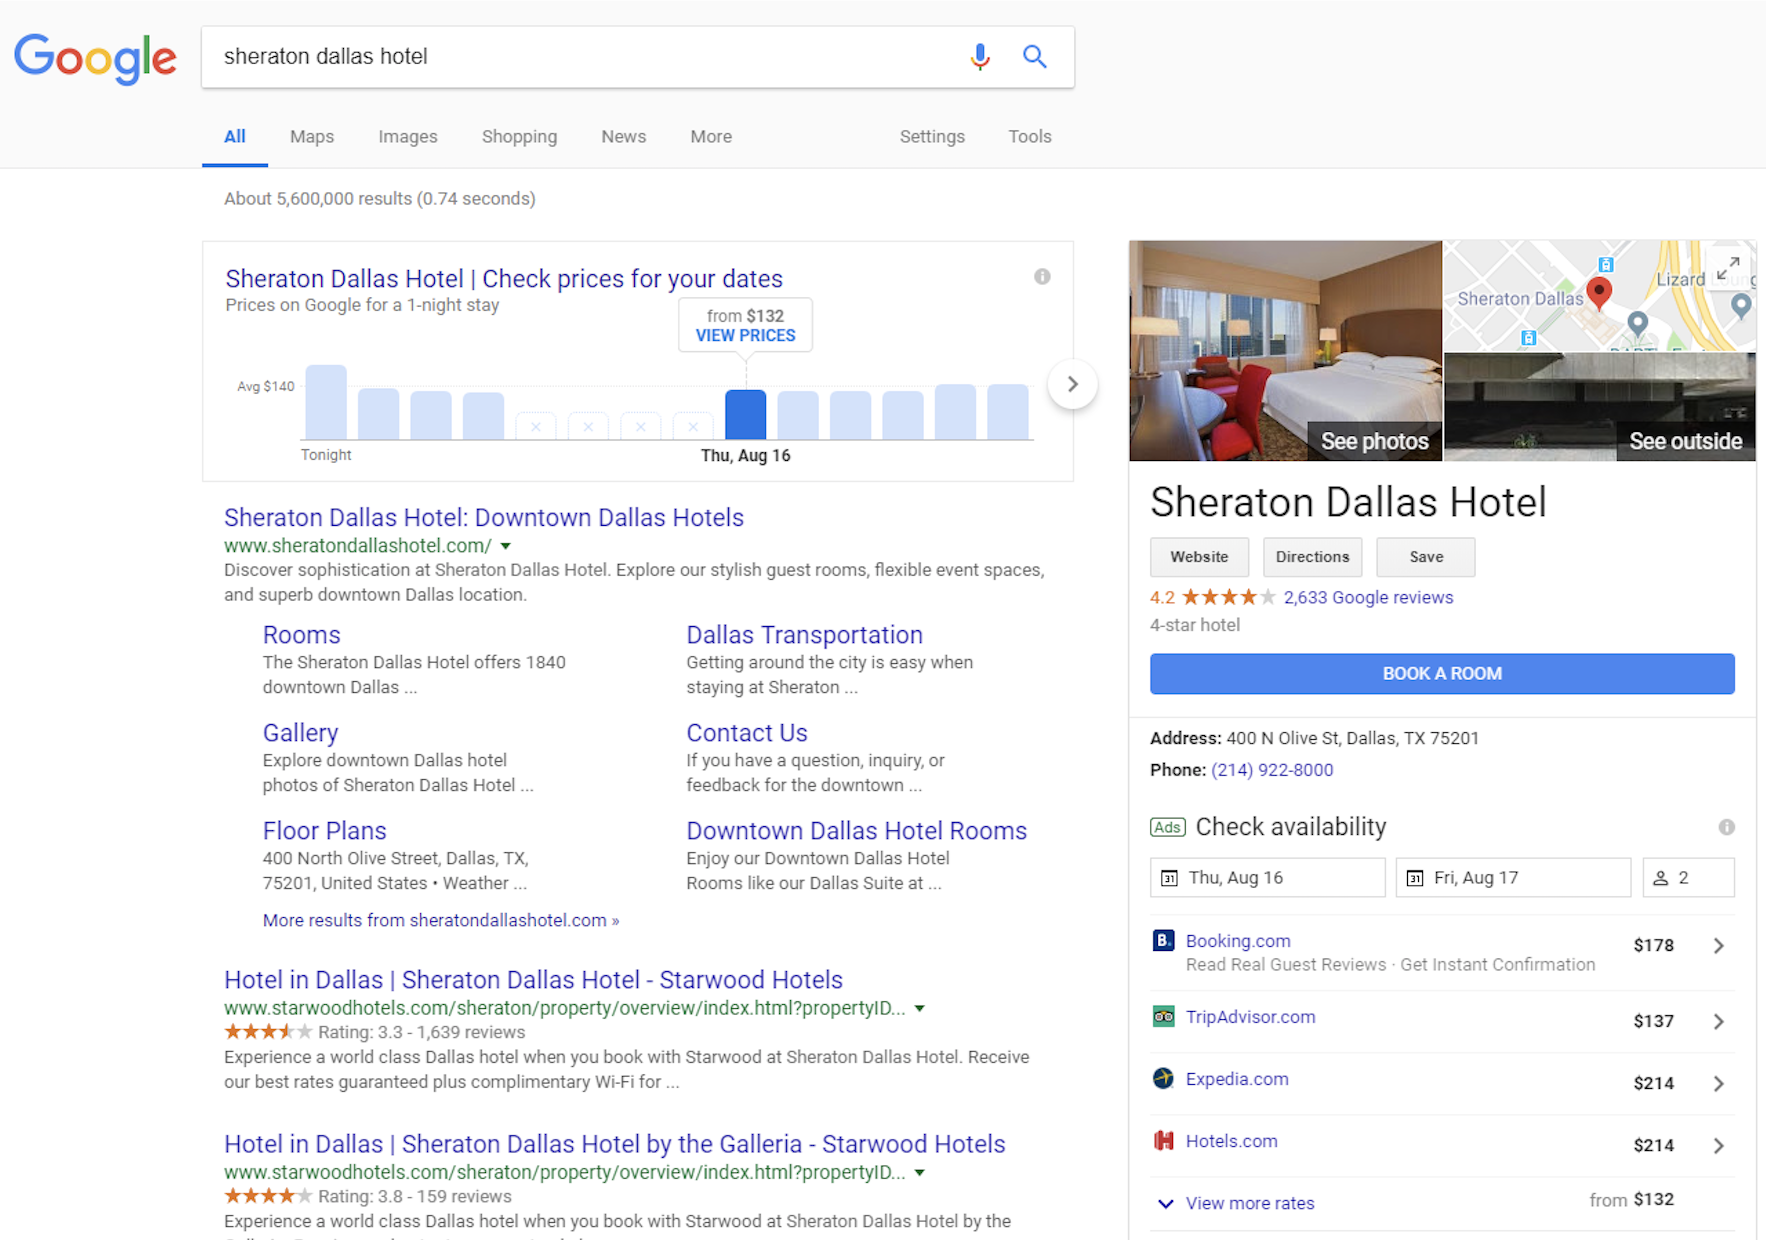 Price Modal Feature on Google Hotel Ads